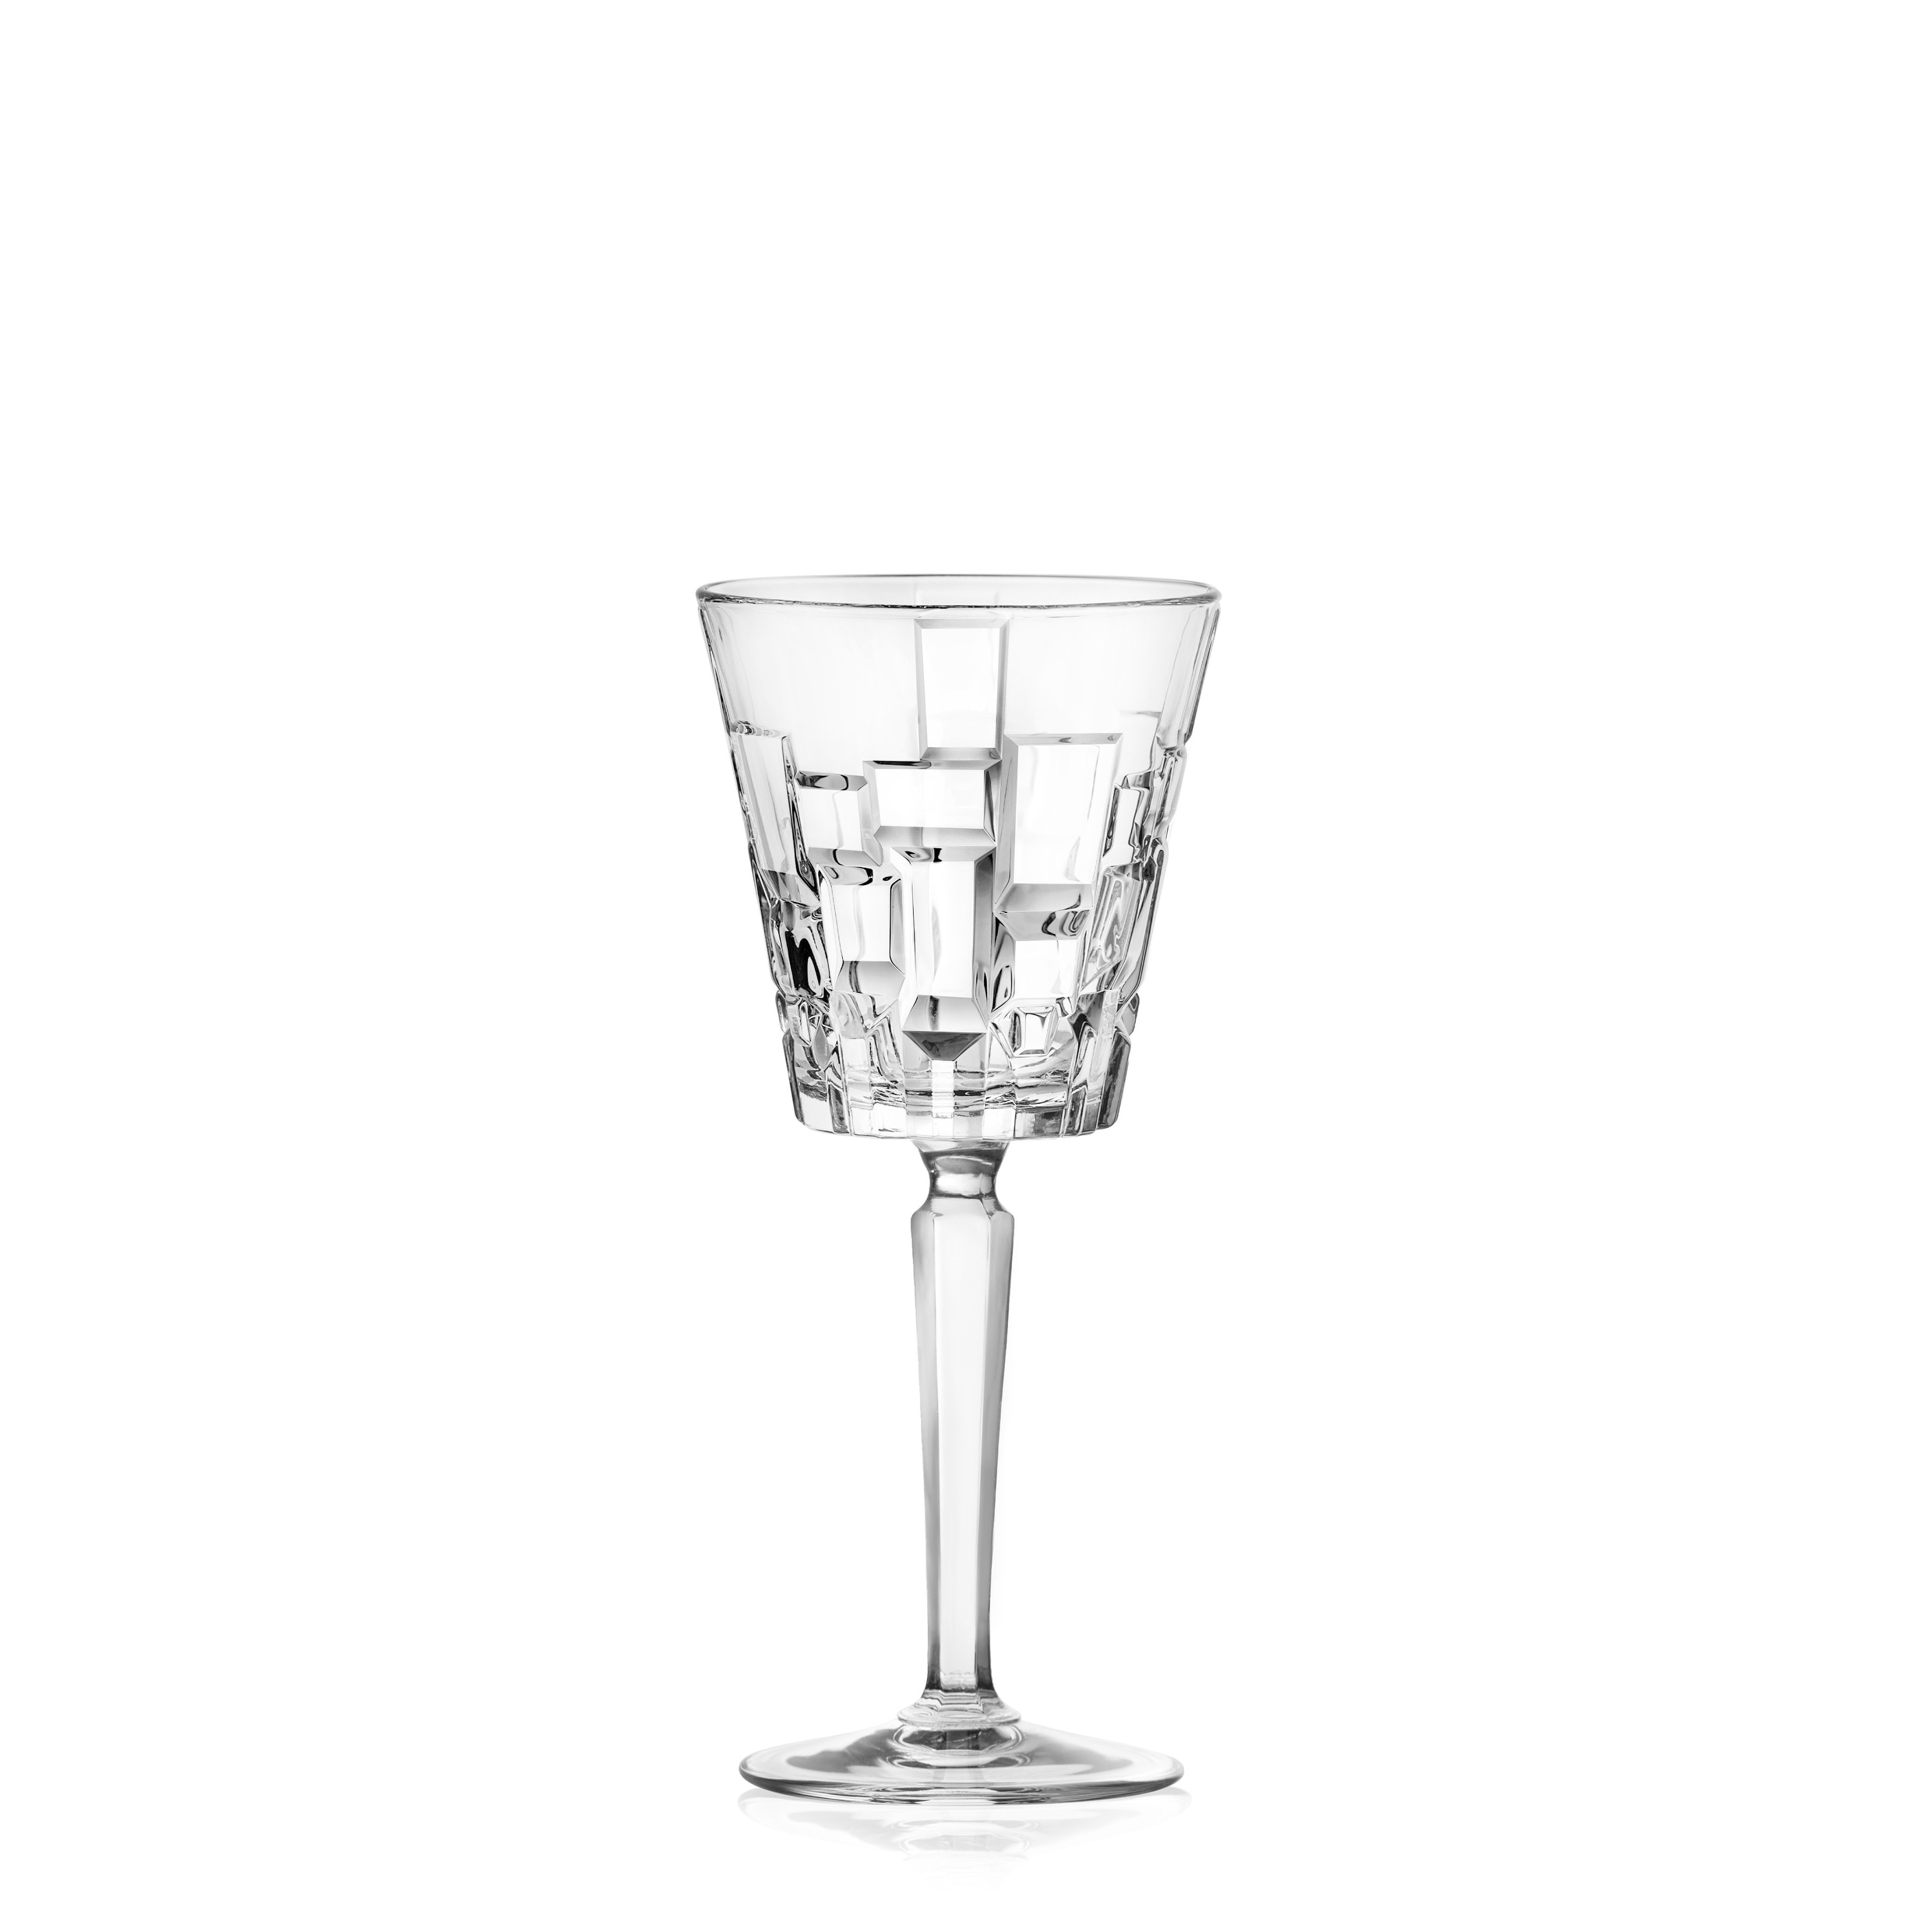 Majestic Gifts Inc. Set/6 Classic Clear Red Wine Glass- 18.5 oz.- Made in Europe